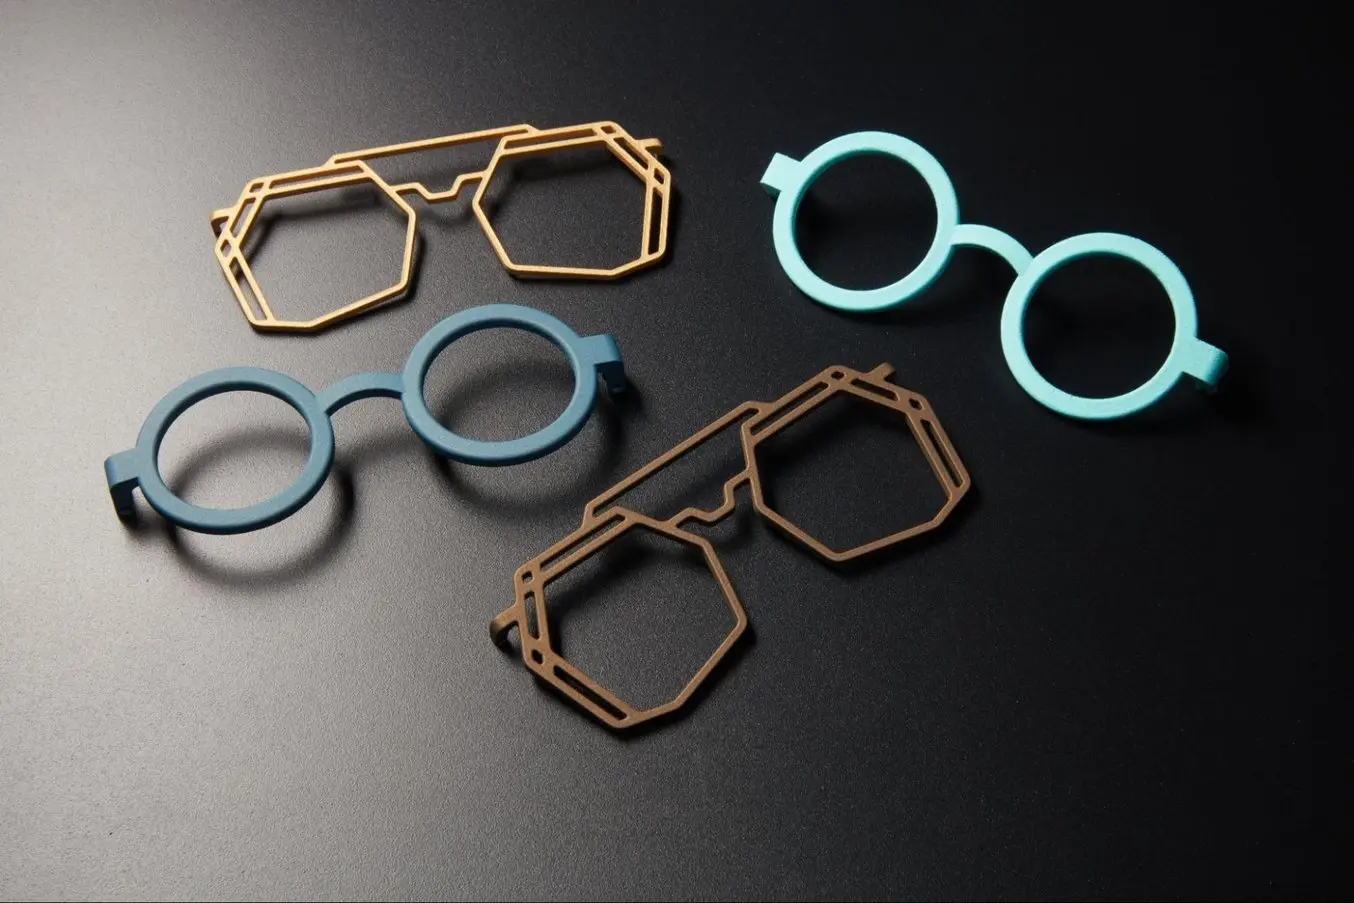 eclectic 3D printed glasses in various colors